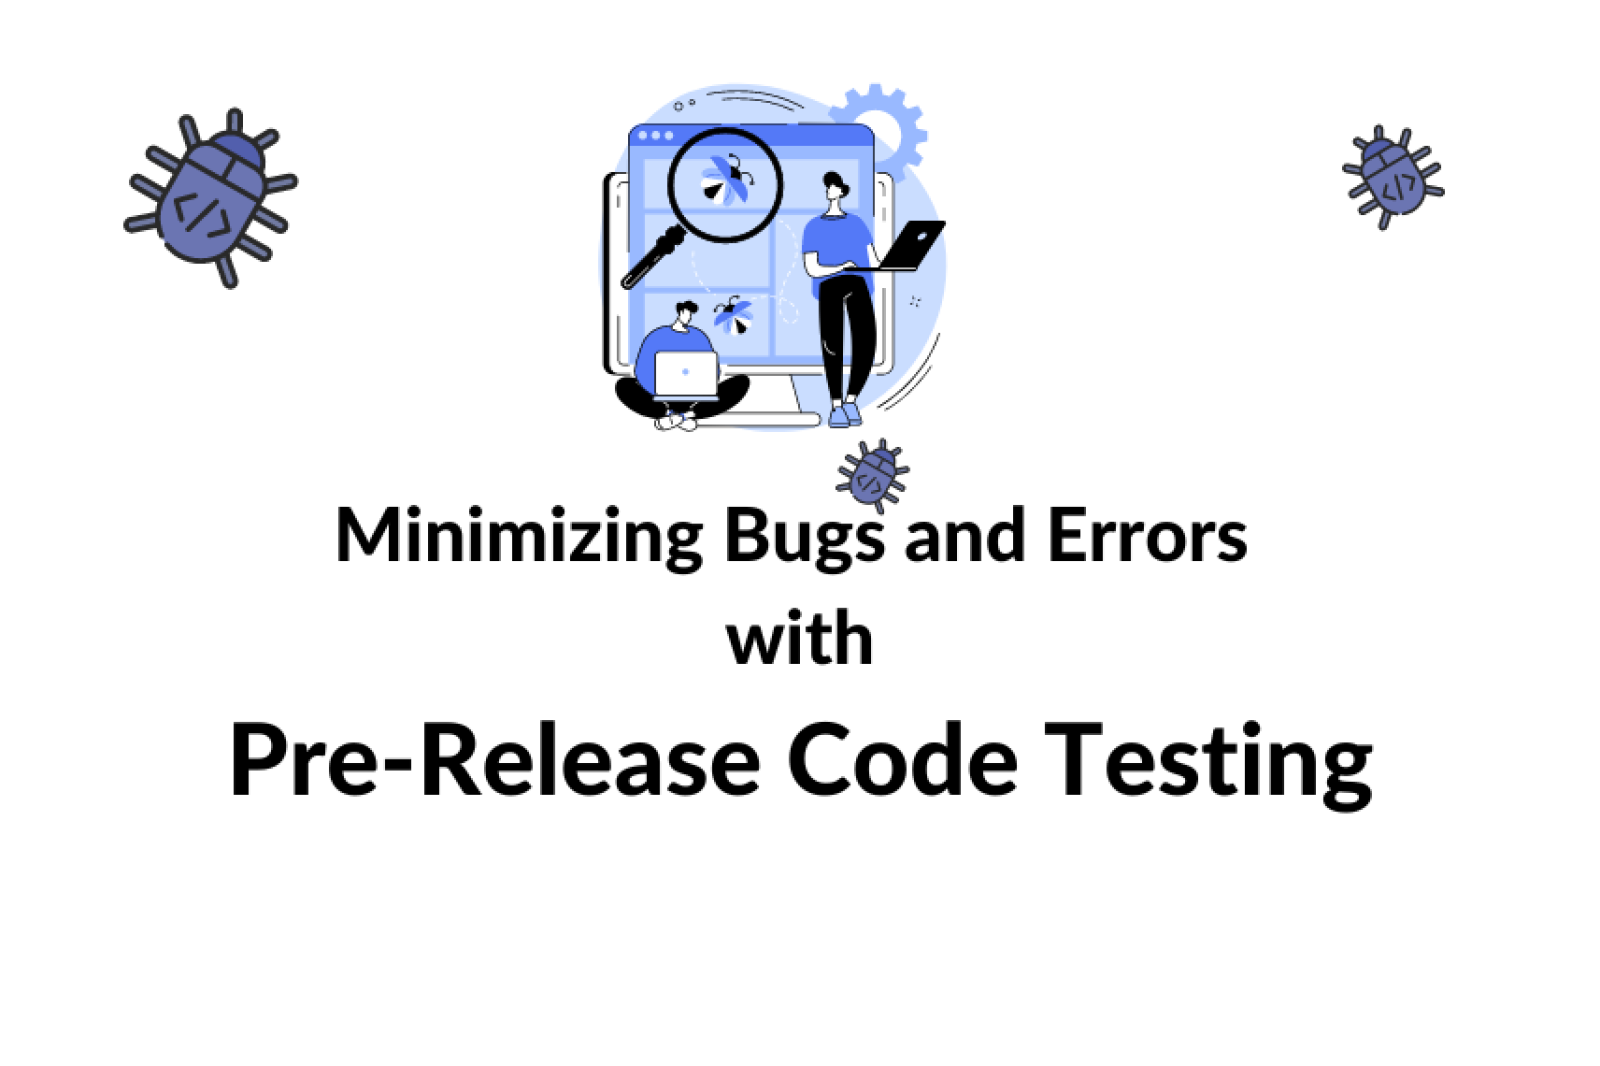 Minimizing Bugs and Errors with Pre-Release Code Testing